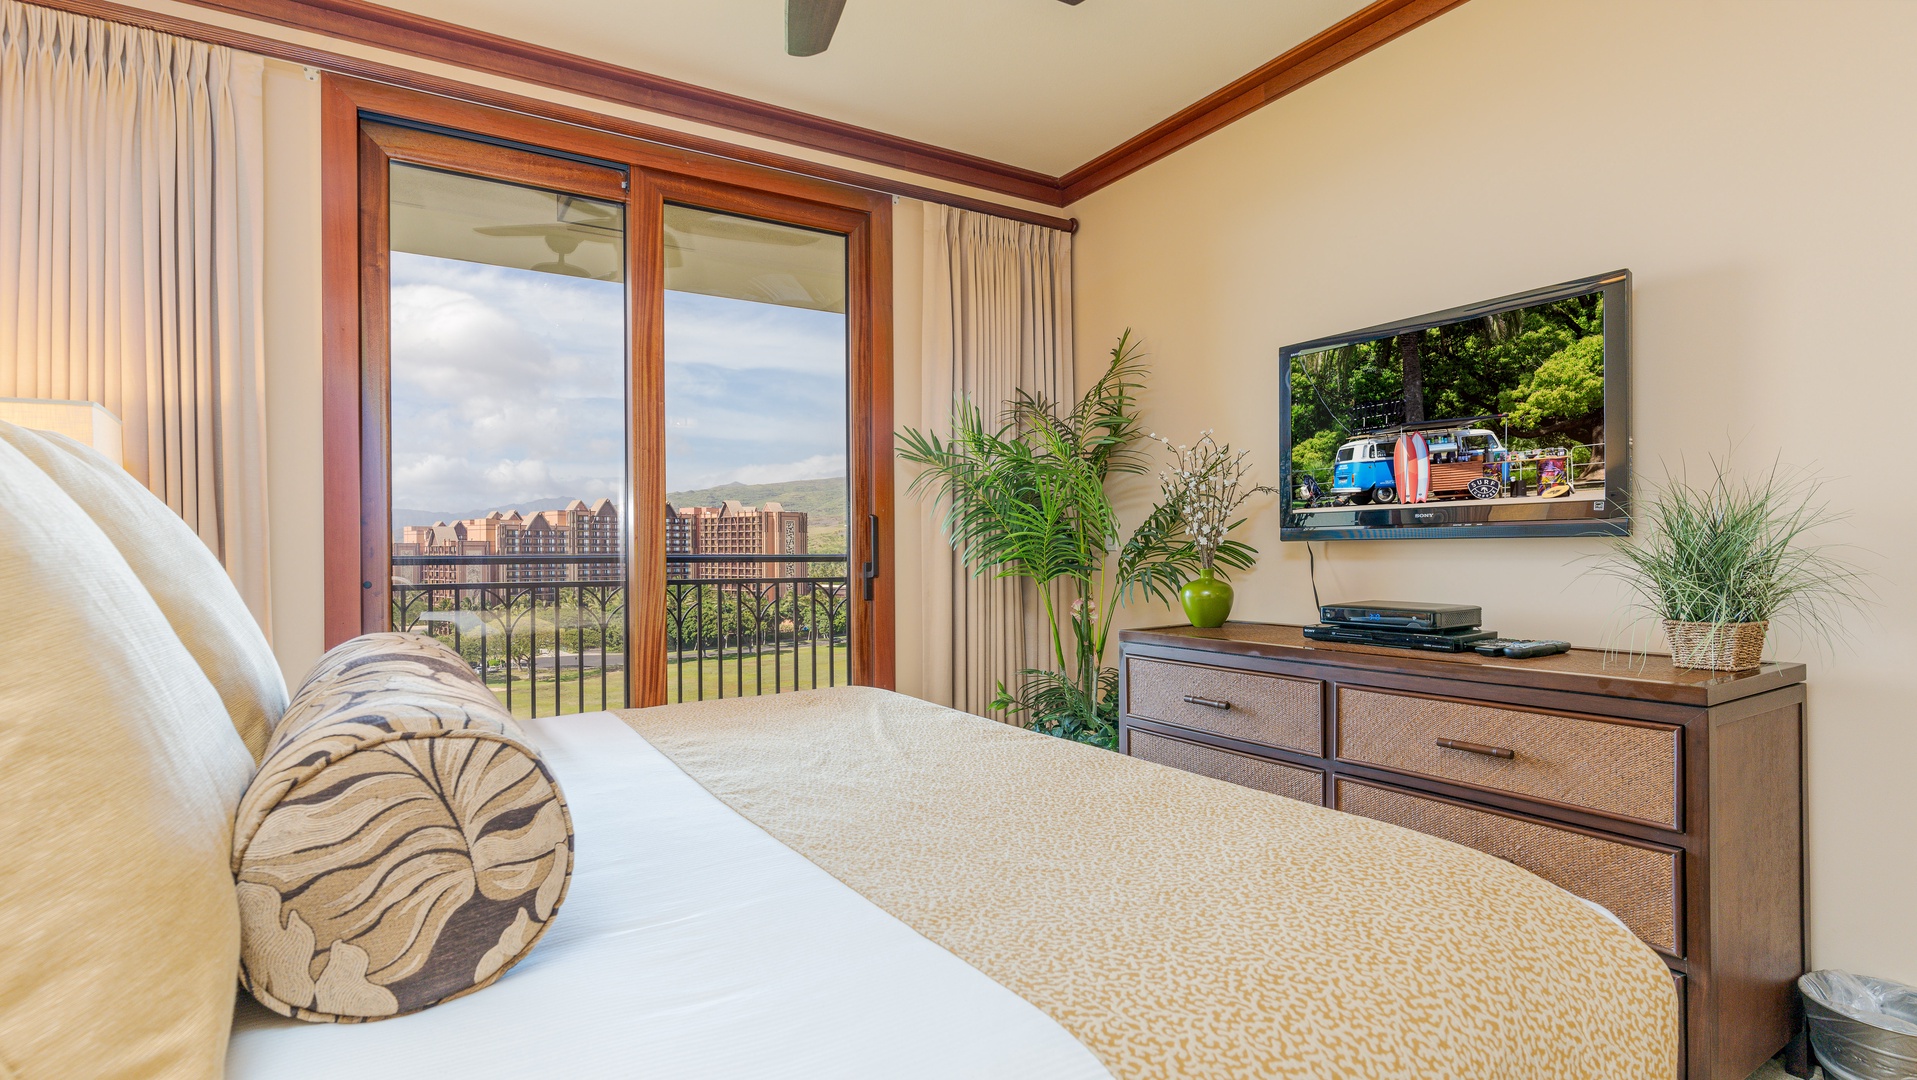 Kapolei Vacation Rentals, Ko Olina Beach Villas B1101 - The primary guest bedroom featuring a TV, dresser and views.